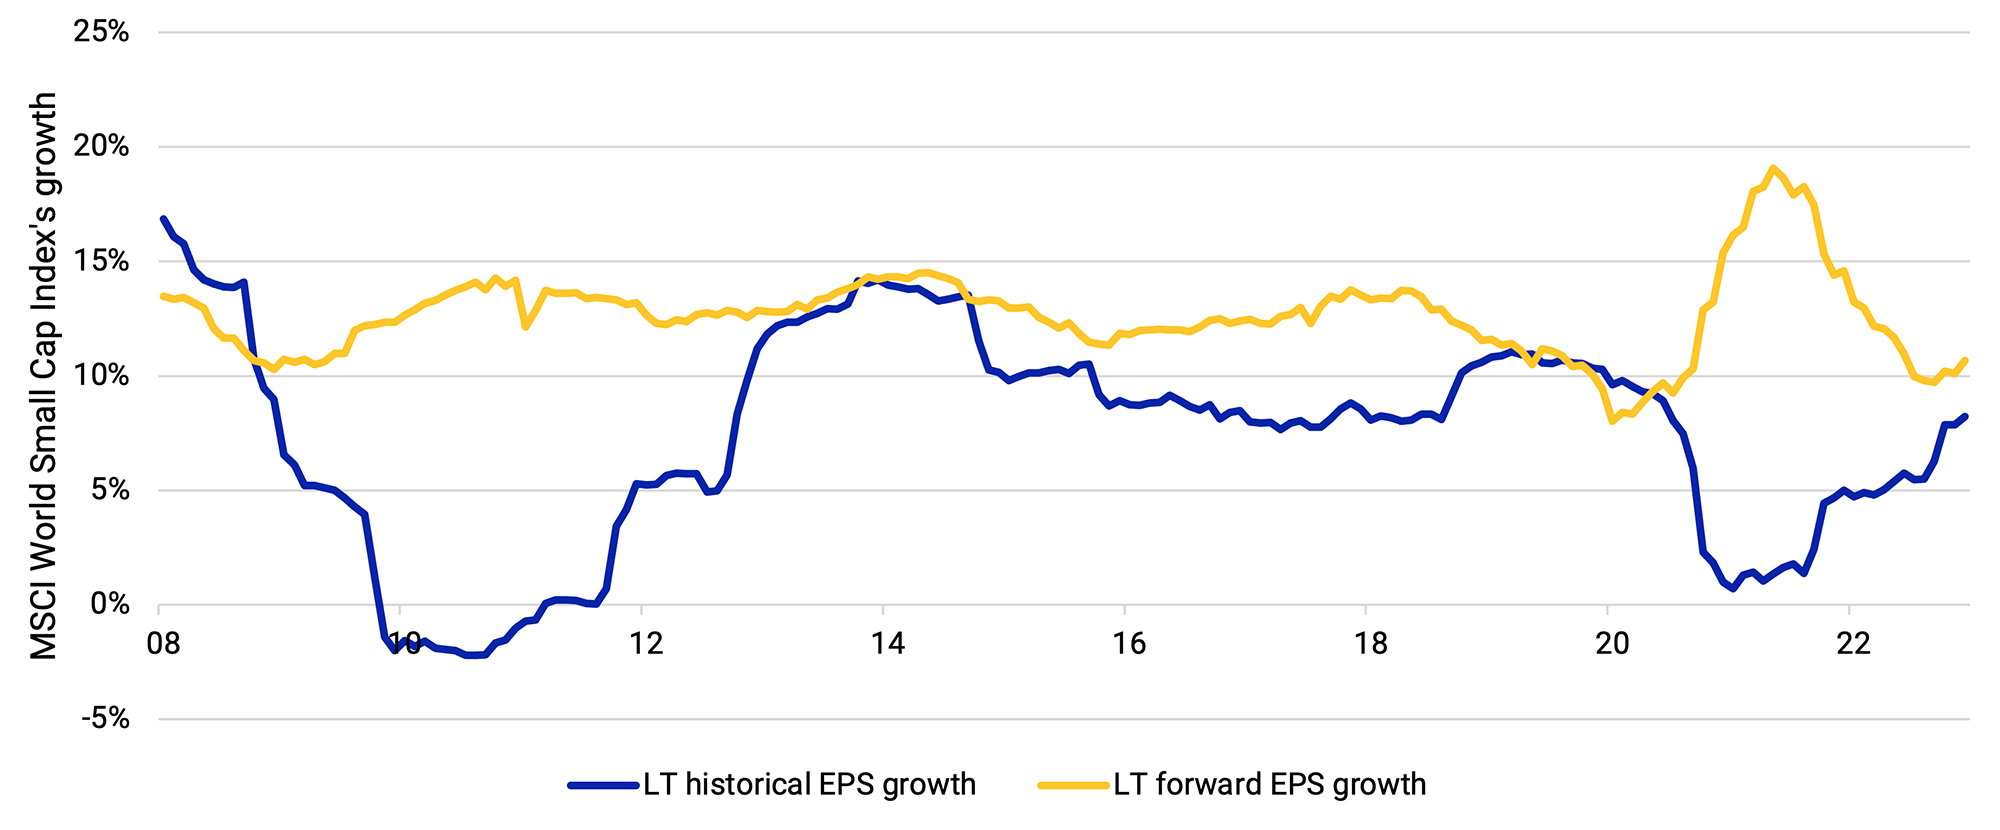 This exhibit is a line graph that plots the long-term historical EPS growth and the forward EPS growth of the MSCI World Cap Index from June 2008 through May 2023